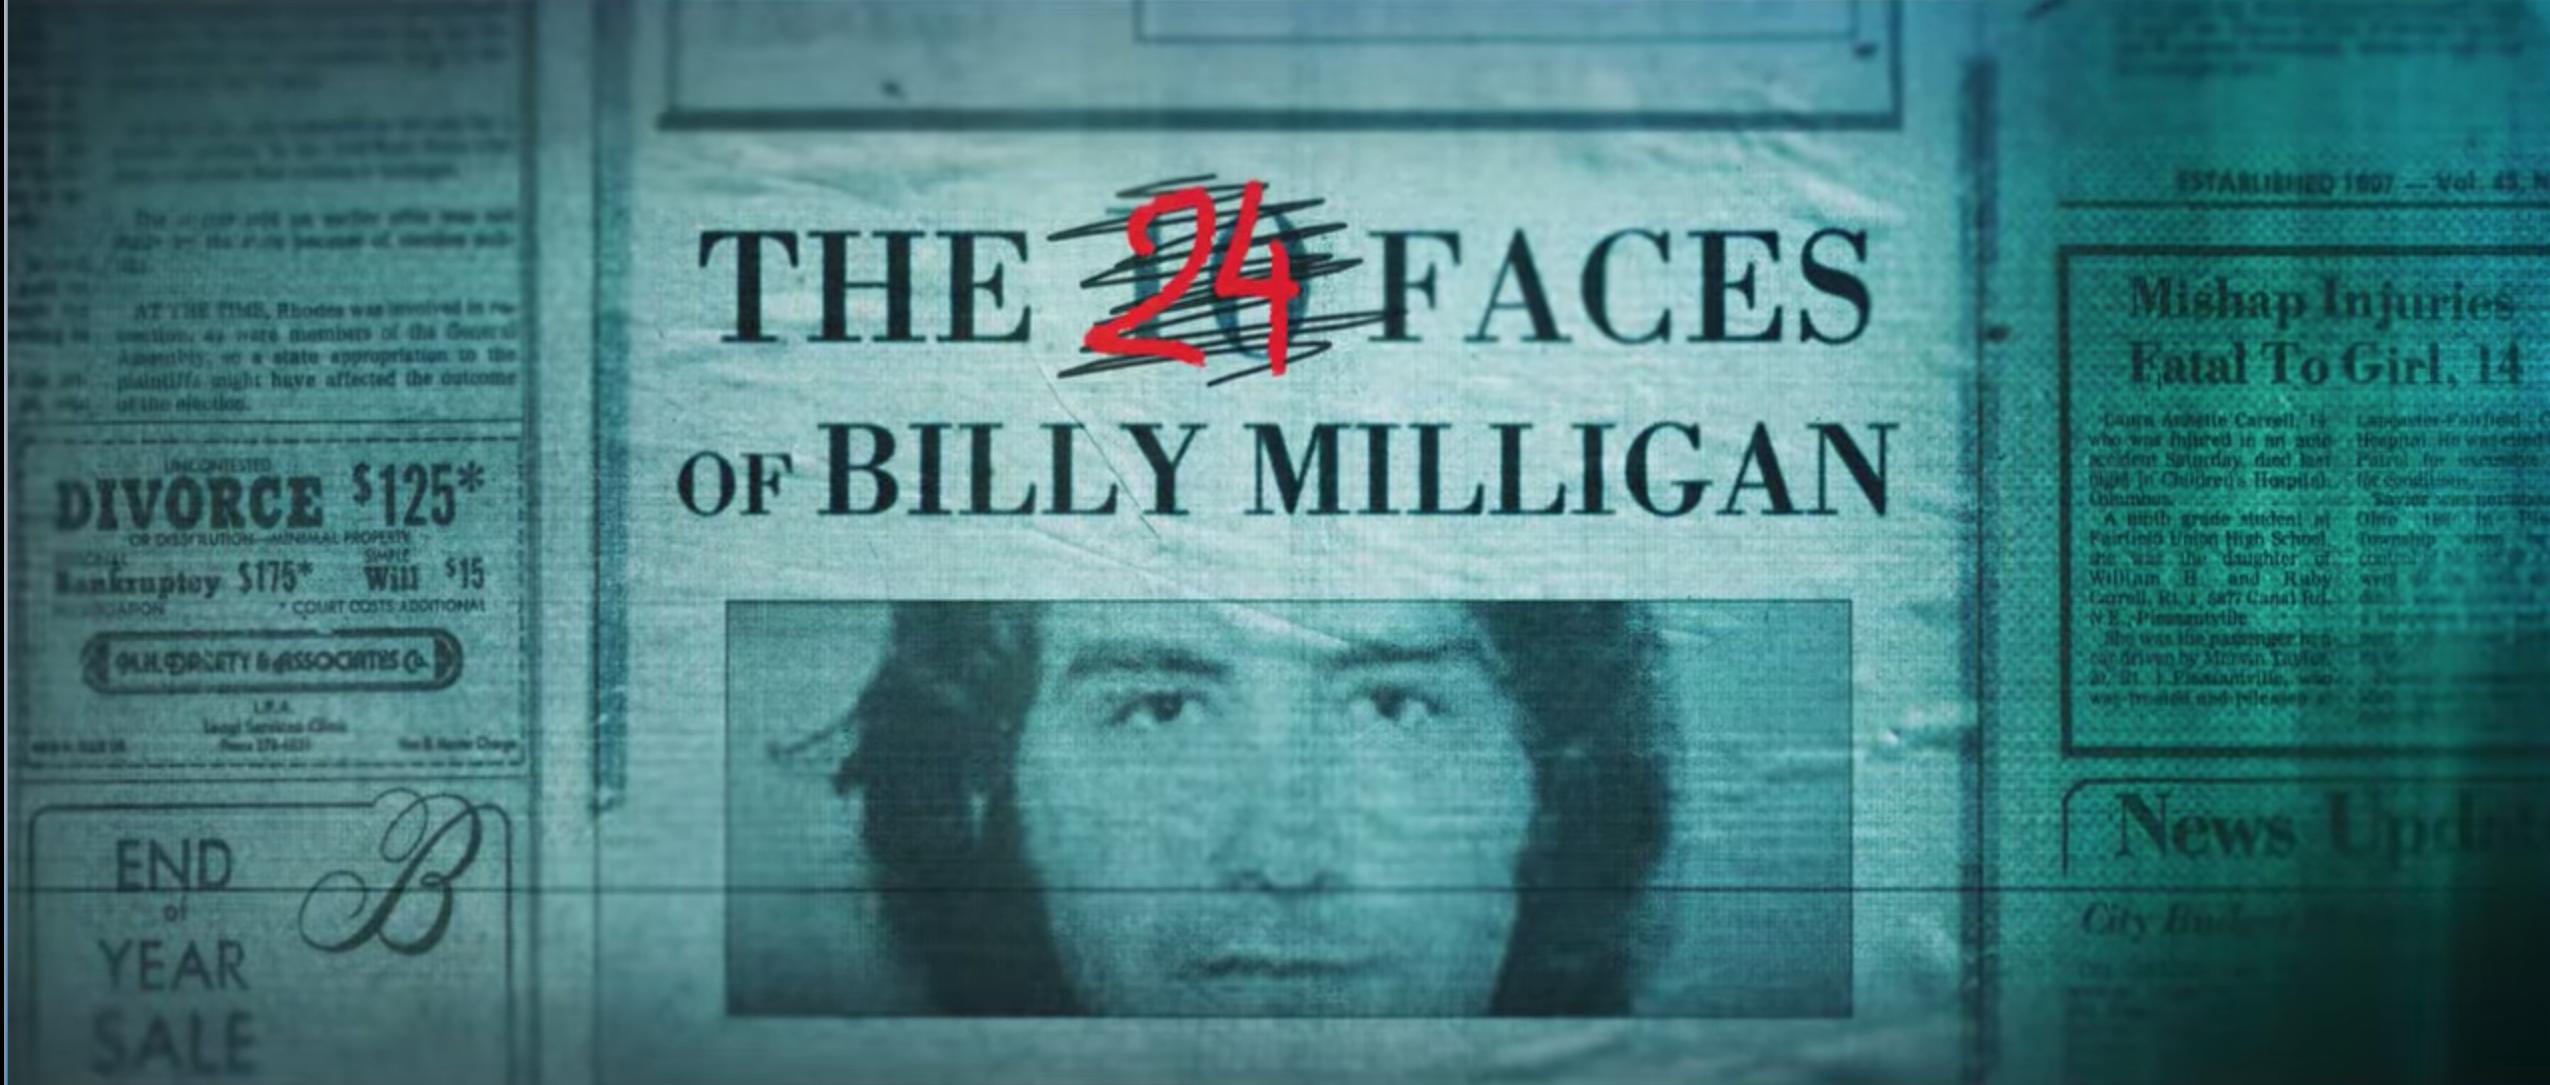 Monsters Inside: The 24 Faces of Billy Milligan: The Golden Age | Season 1 | Episode 3